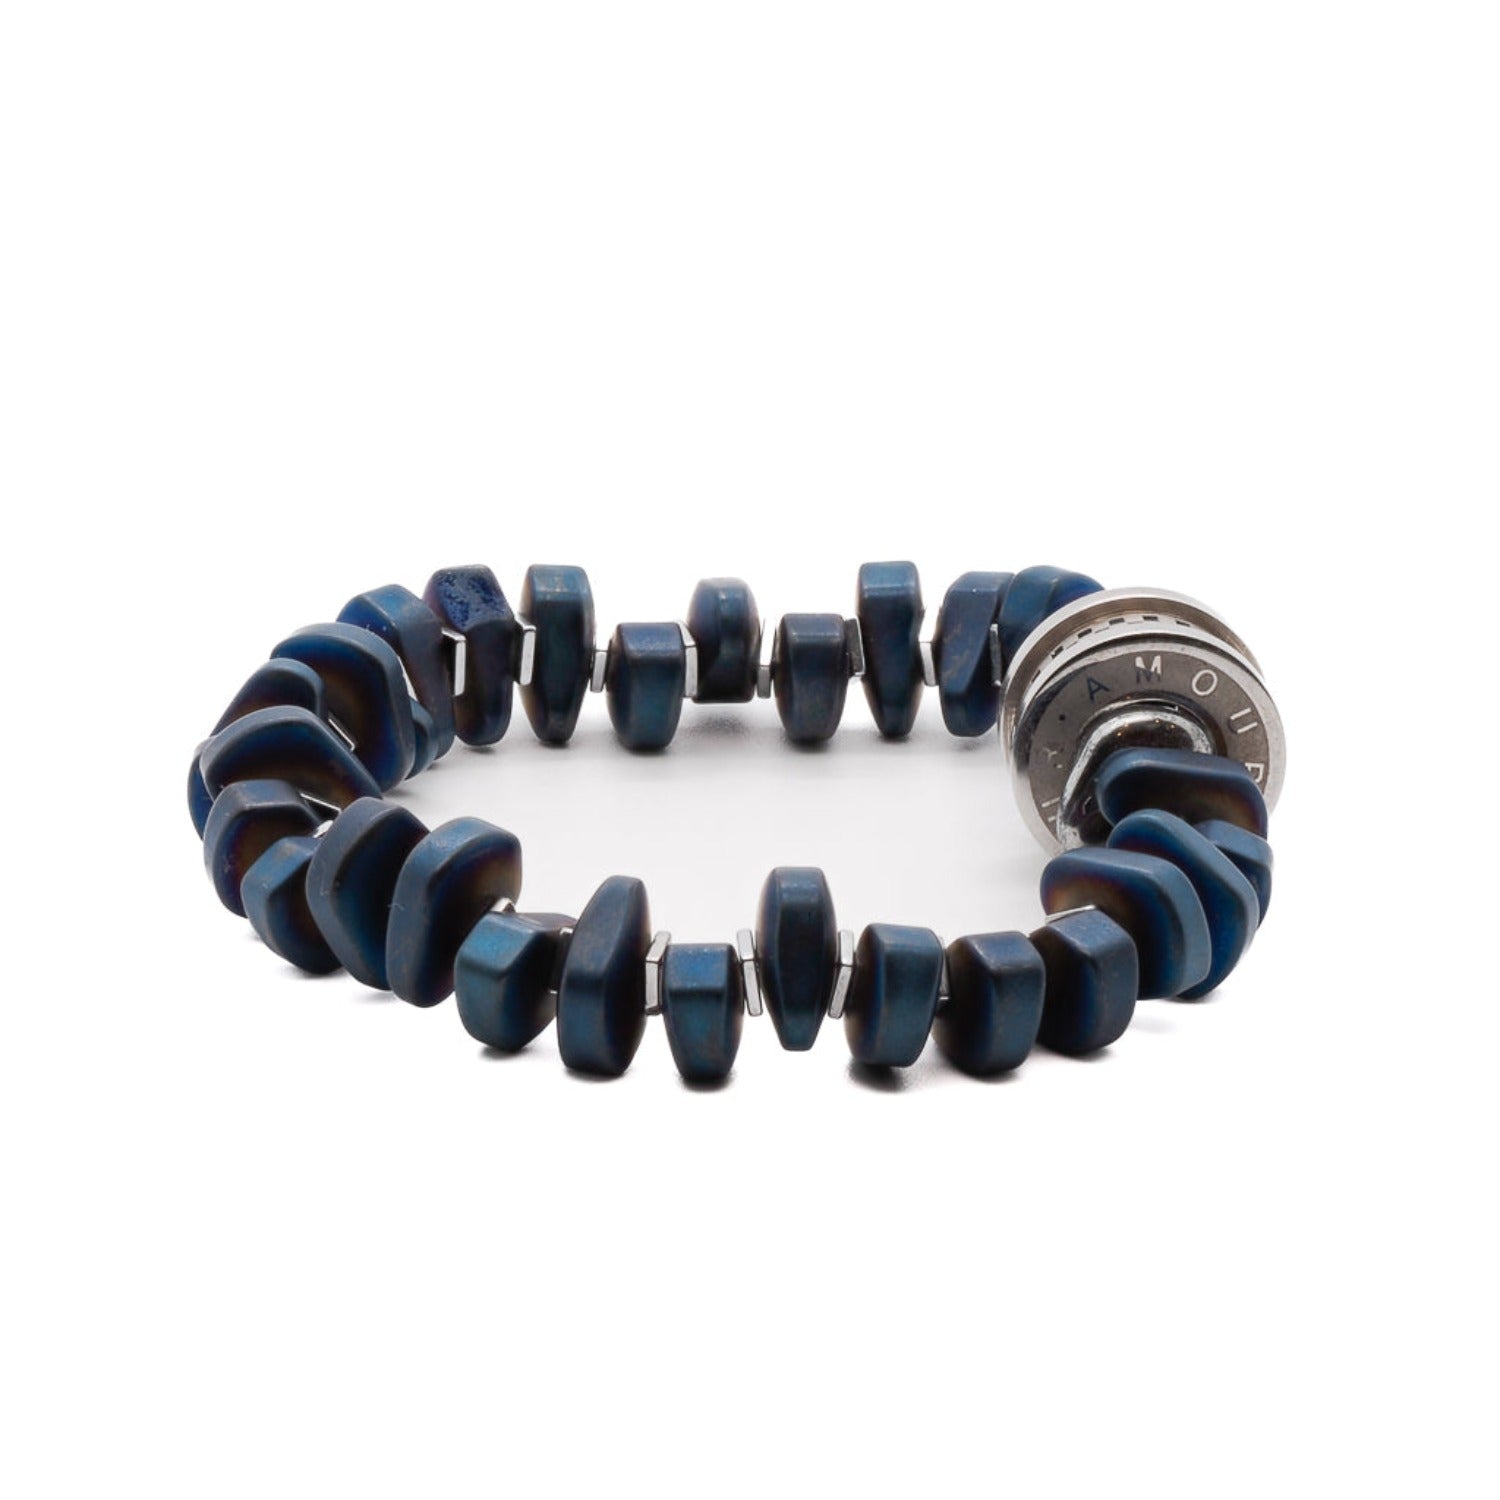 A side view of the stretchy high-quality jewelry cord of the Blue Amour Men Bracelet